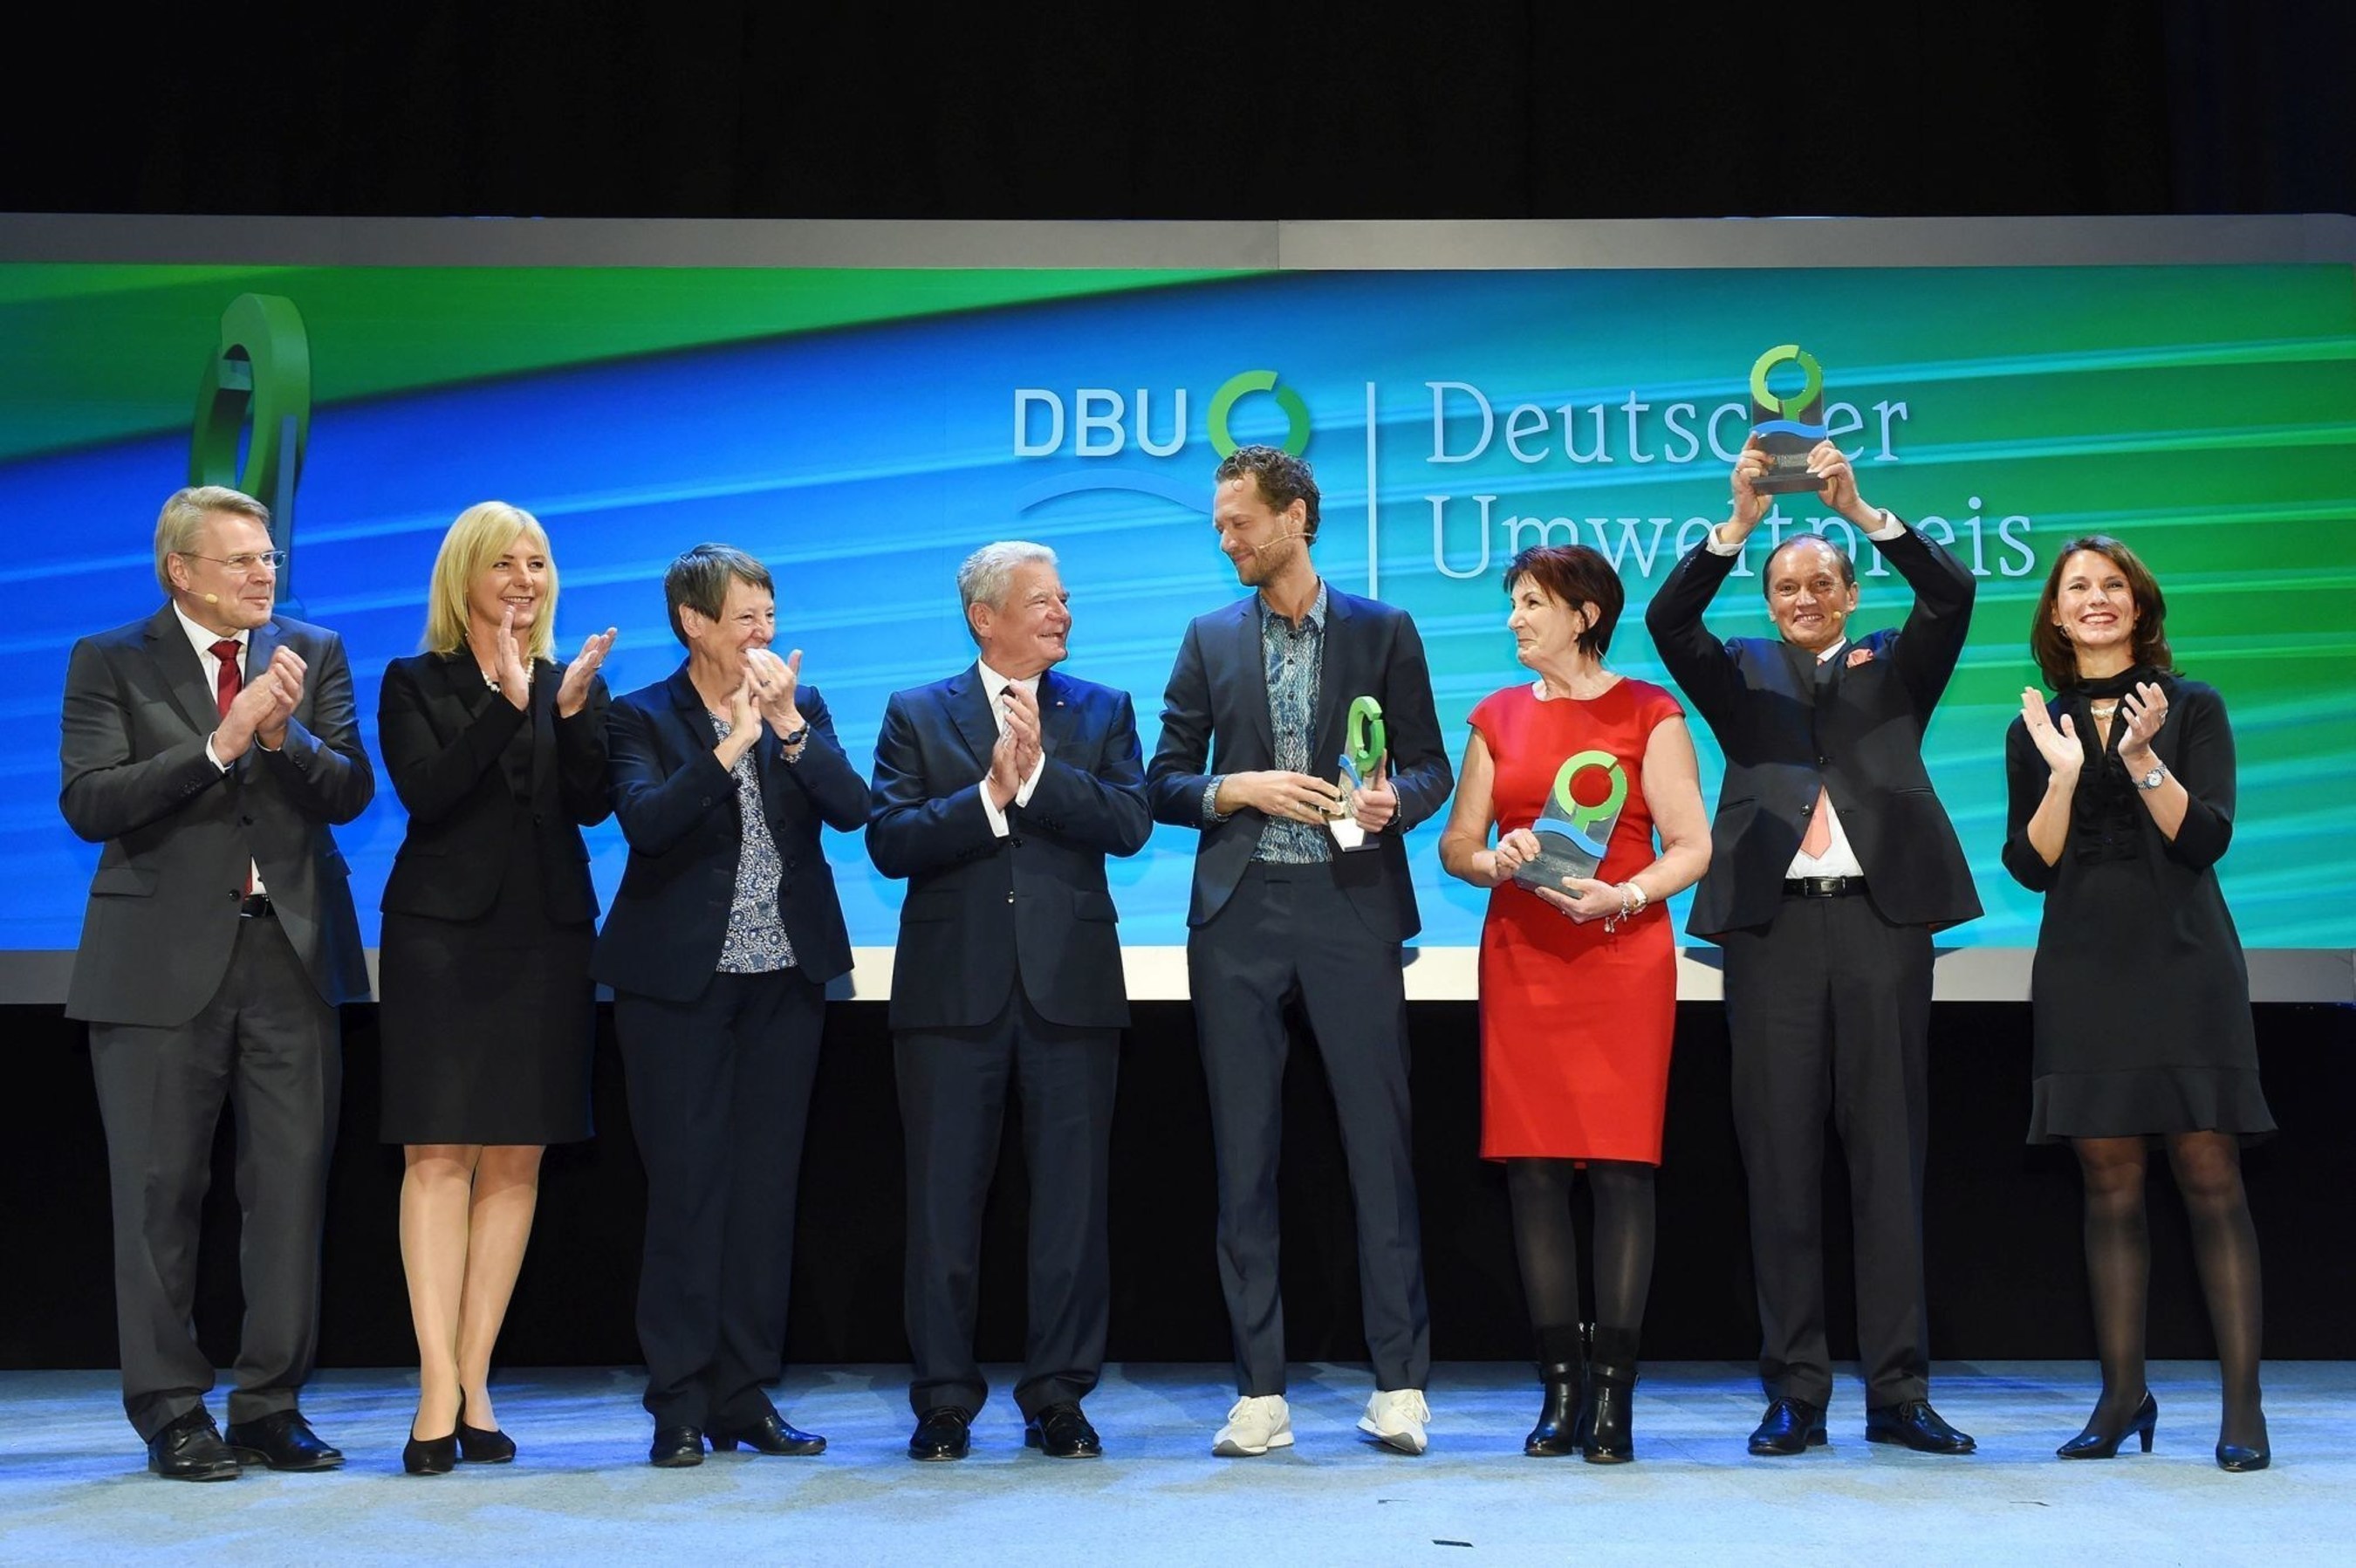 Celebrating the award together (left to right): DBU General Secretary Dr. Heinrich Bottermann, State Minister of the Environment and Consumer Protection in Bavaria Ulrike Scharf, Federal Minister for Environment, Nature Conservation, Building and Nuclear Safety Dr. Barabara Hendricks, Federal President Joachim Gauck, entrepreneur Bas van Abel, scientist Prof. Angelika Mettke, entrepreneur Walter Feeß and DBU Chairperson of the Board of Trustees Rita Schwarzeluhr-Sutter. (PRNewsFoto/DBU)